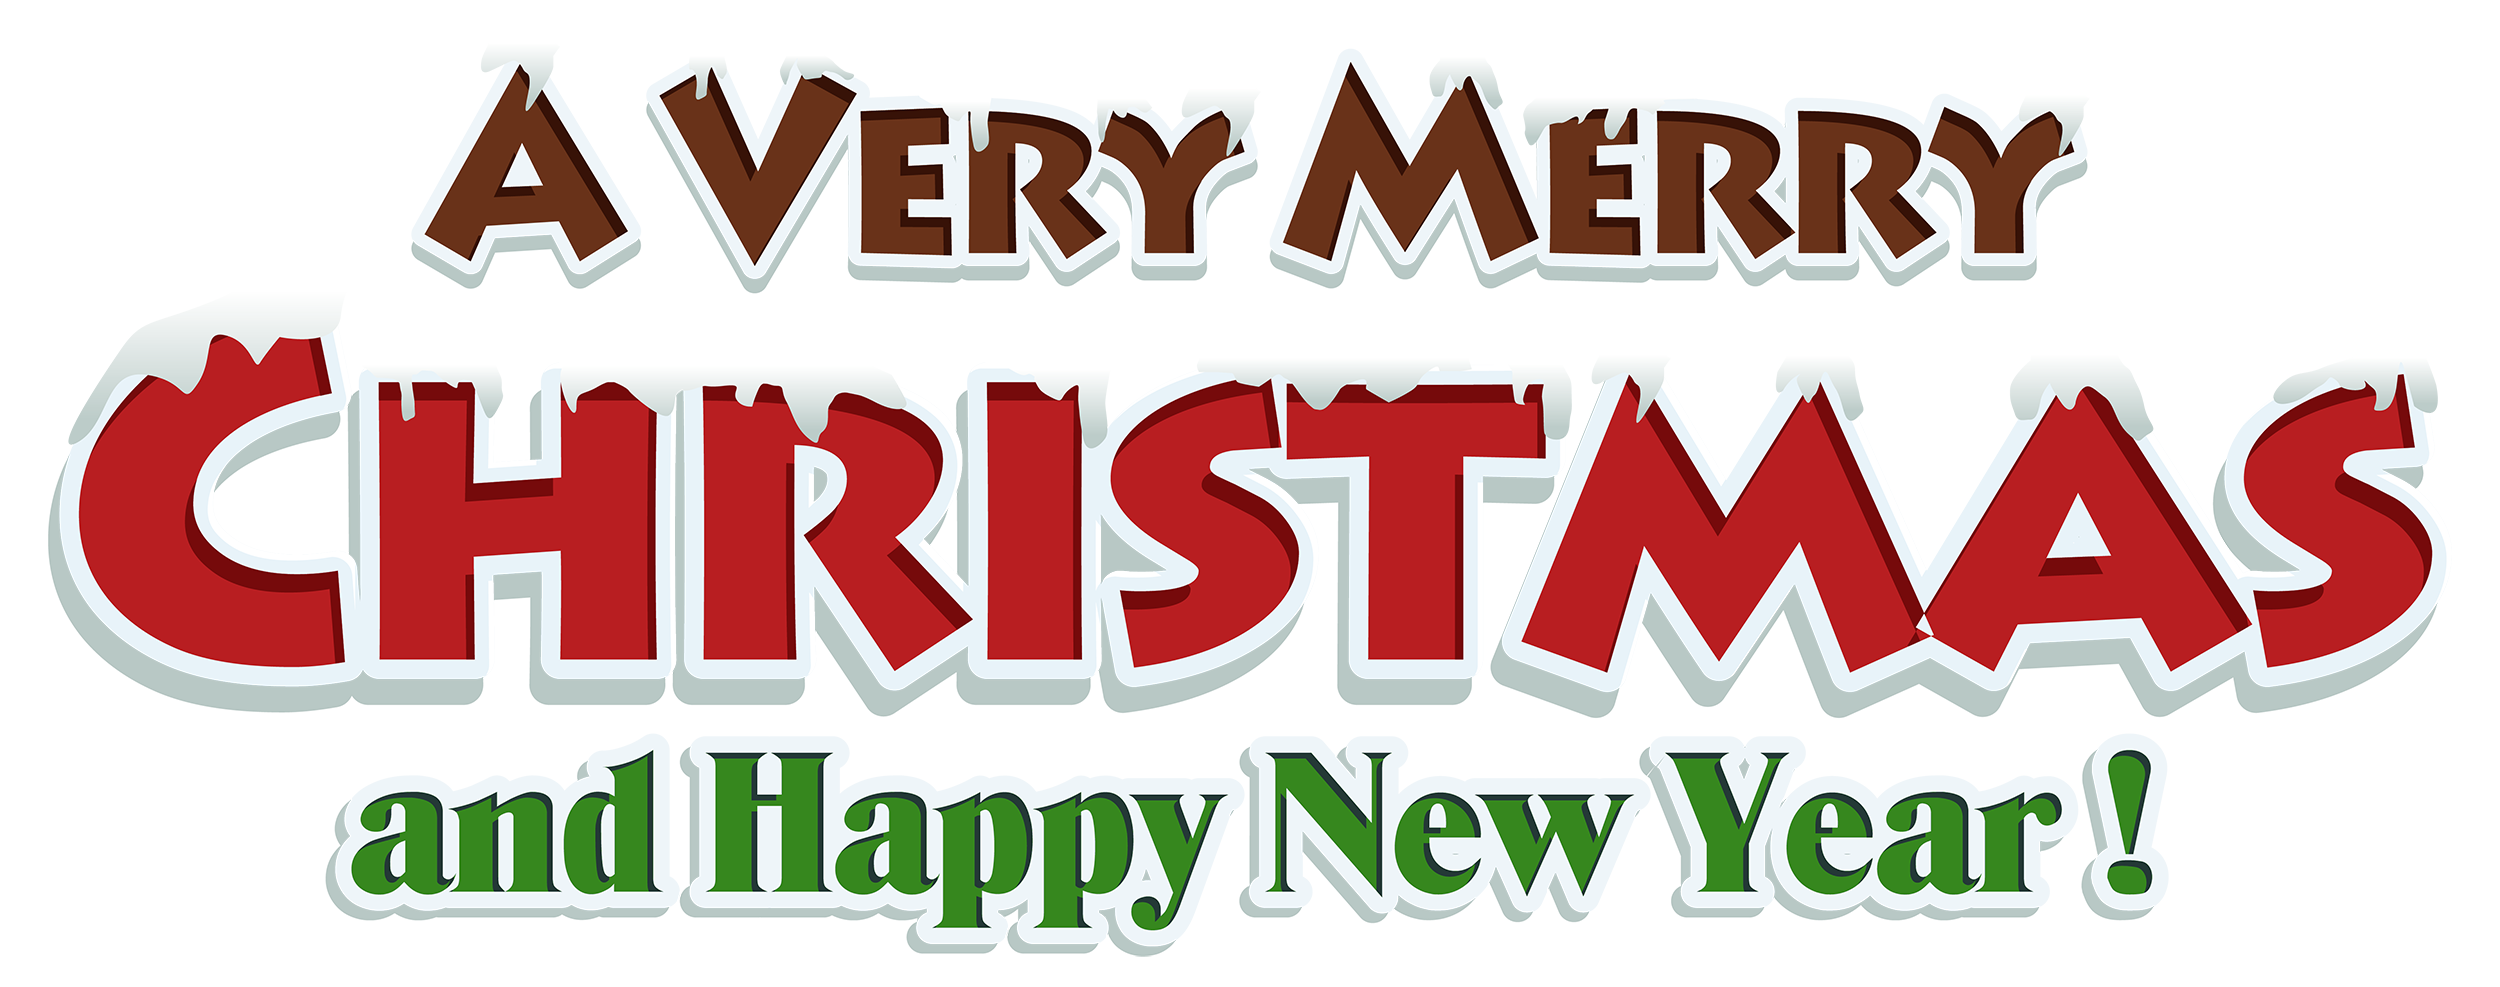 Merry Christmas Red Text Decor PNG Clipart Best WEB Clipart pics